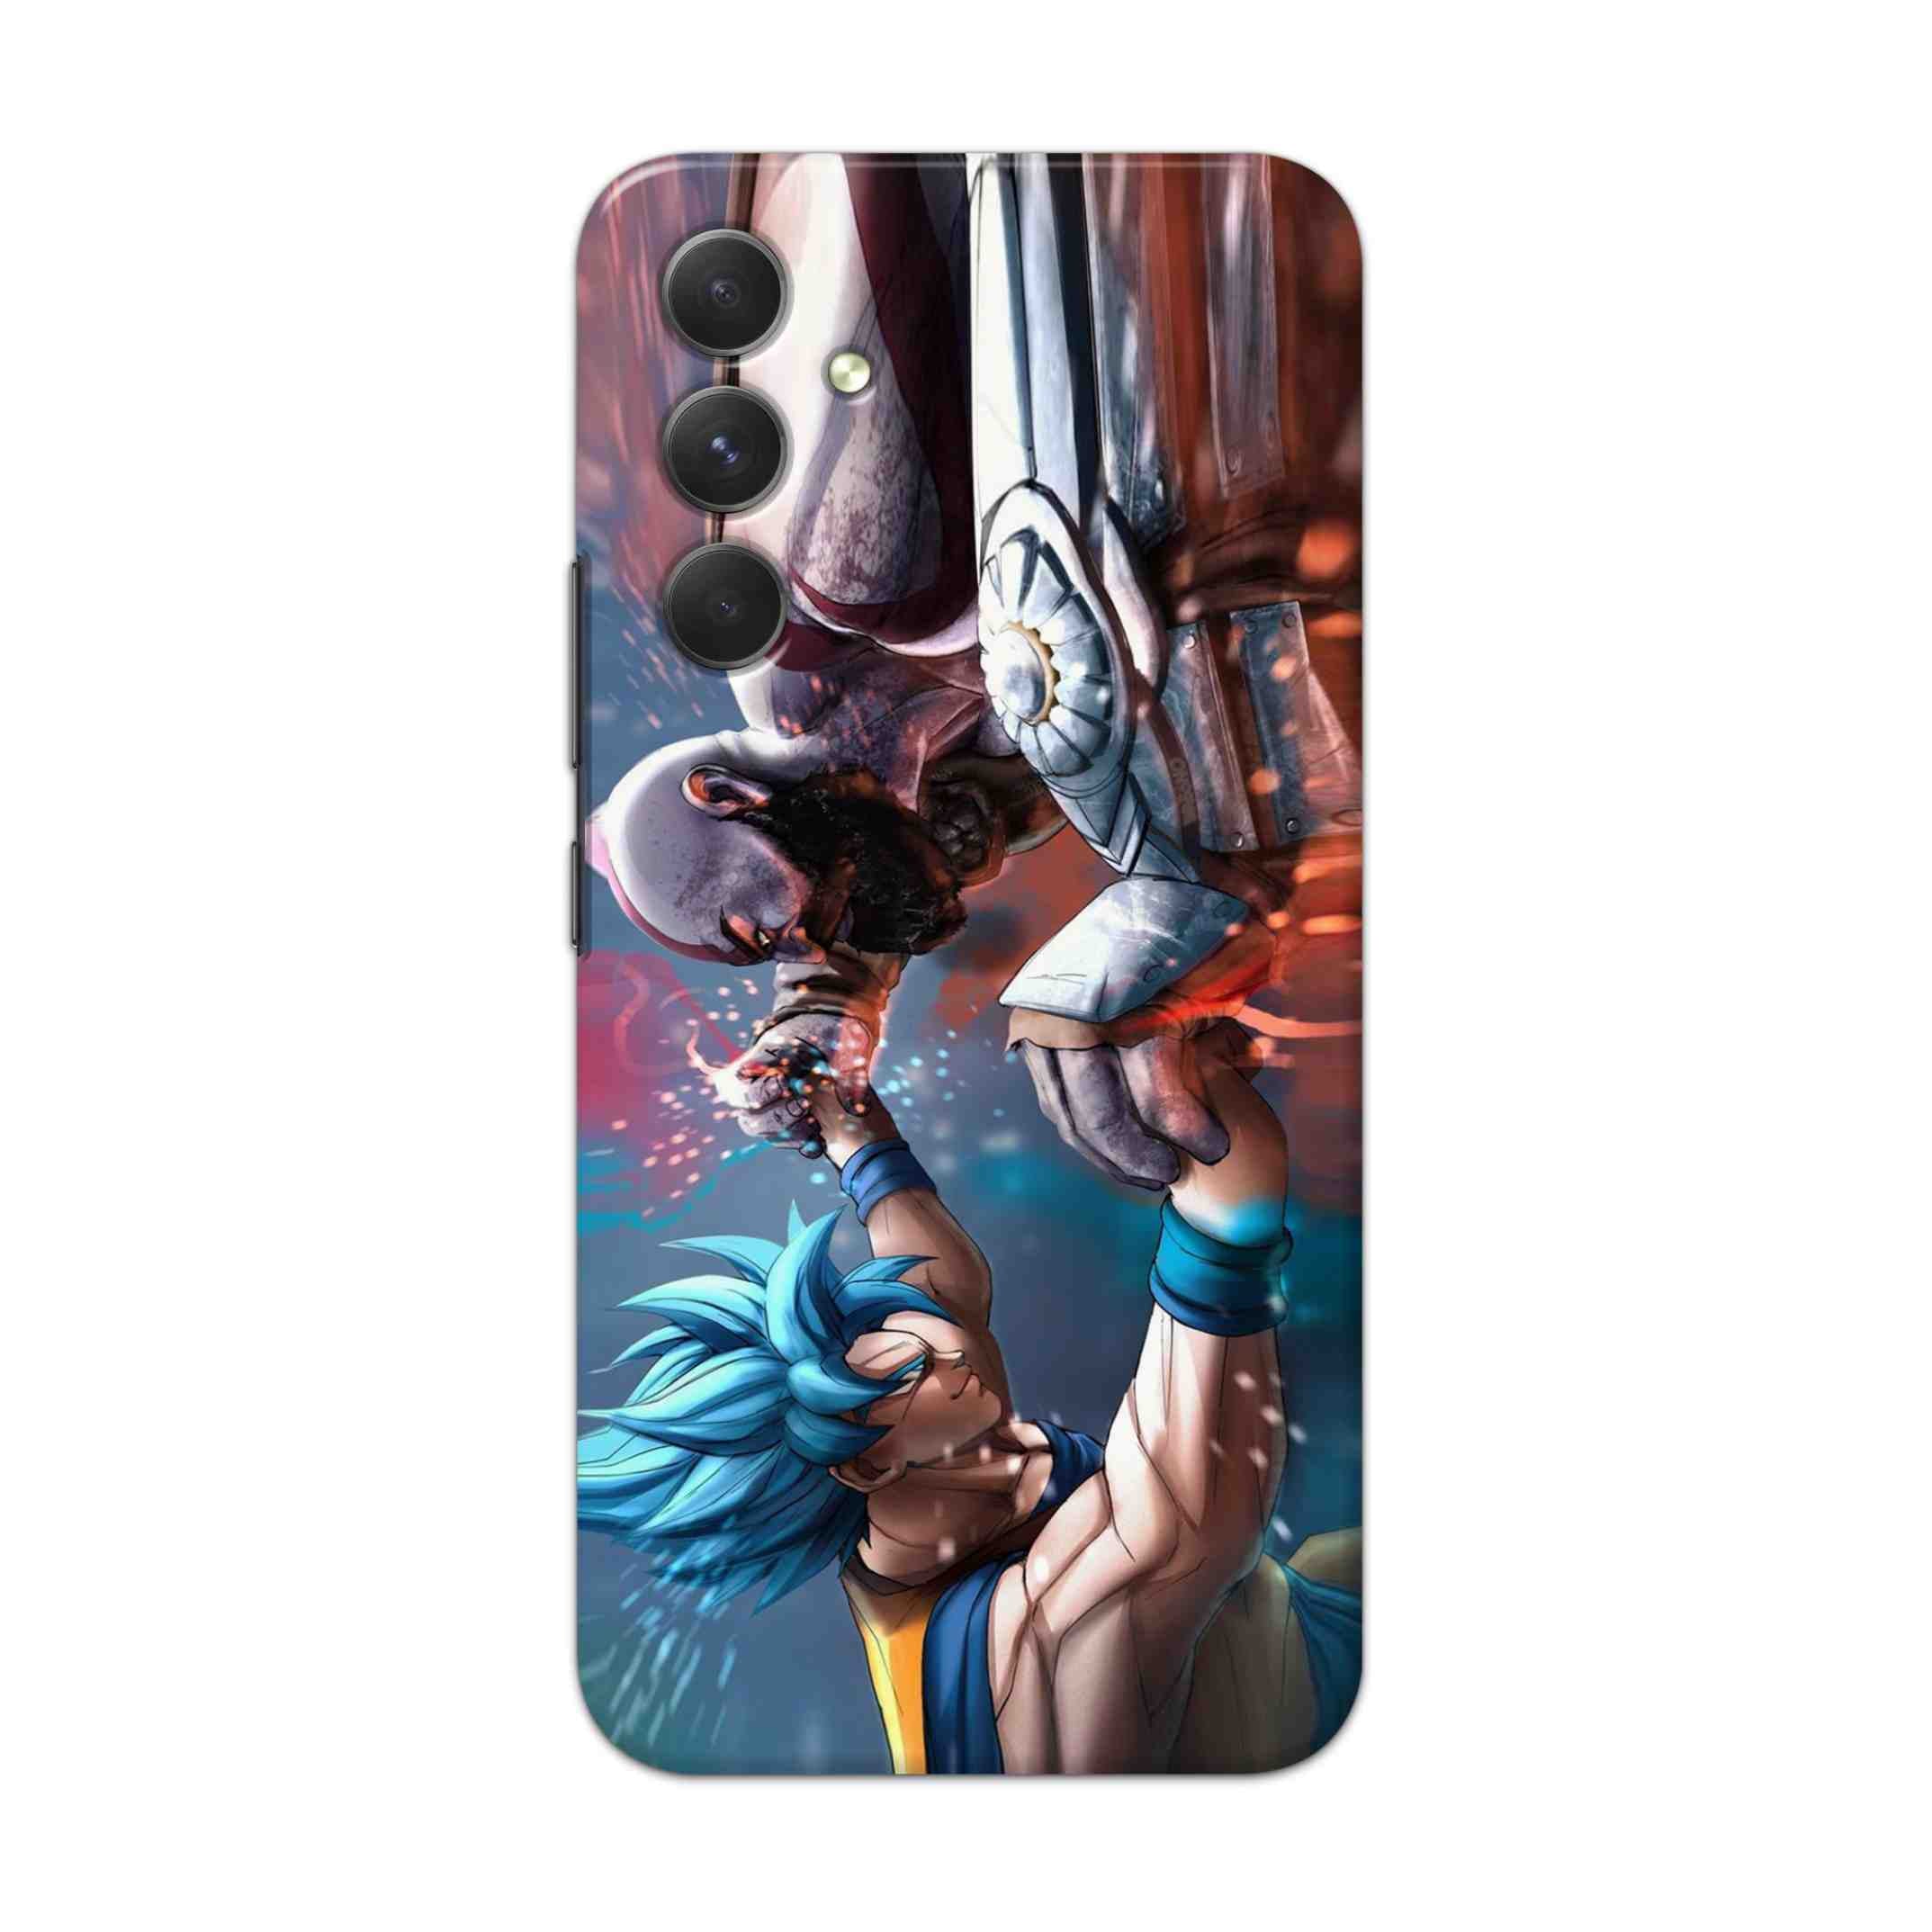 Buy Goku Vs Kratos Hard Back Mobile Phone Case Cover For Samsung Galaxy A54 5G Online